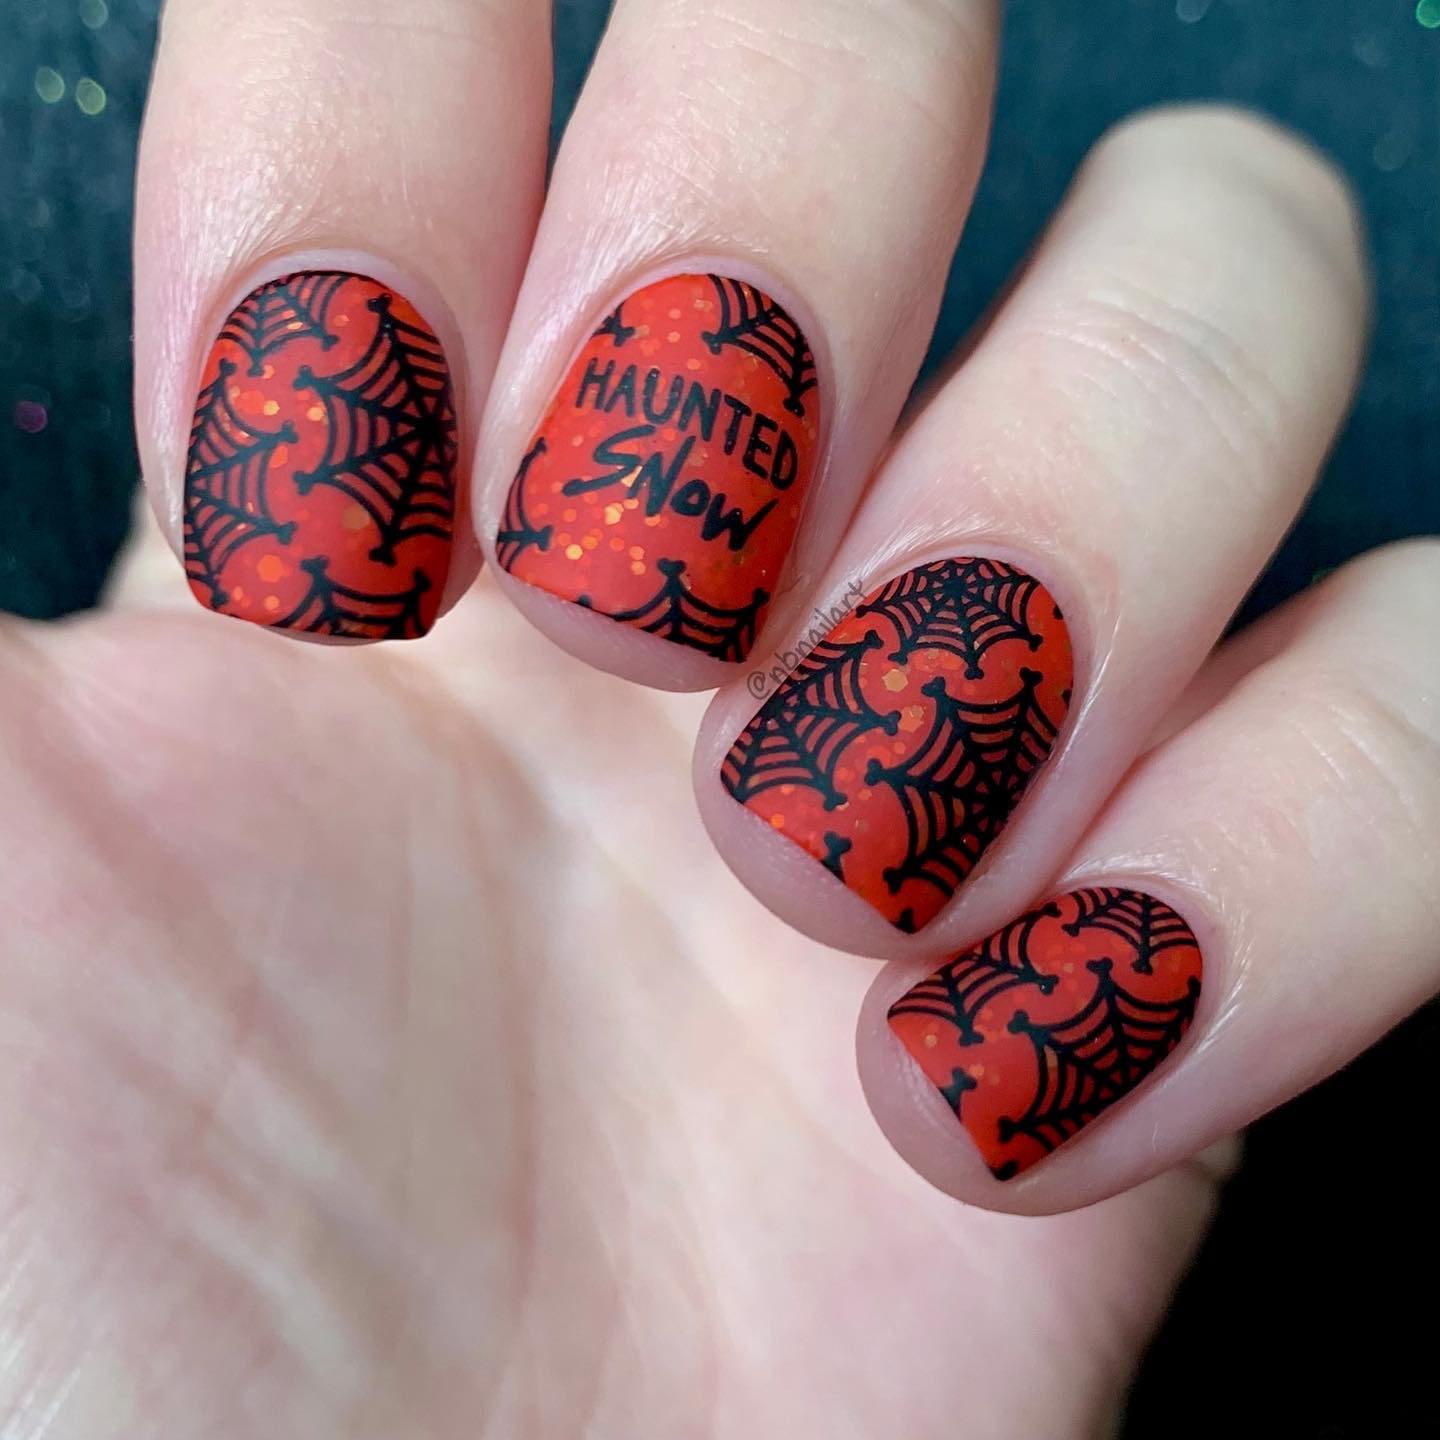 Are you ready for Halloween? To feel the Halloween to the fullest you should have nails like the one above. This new polish color between red and orange go well with the spiderwebs on it. The matte look gives it a bold feeling.